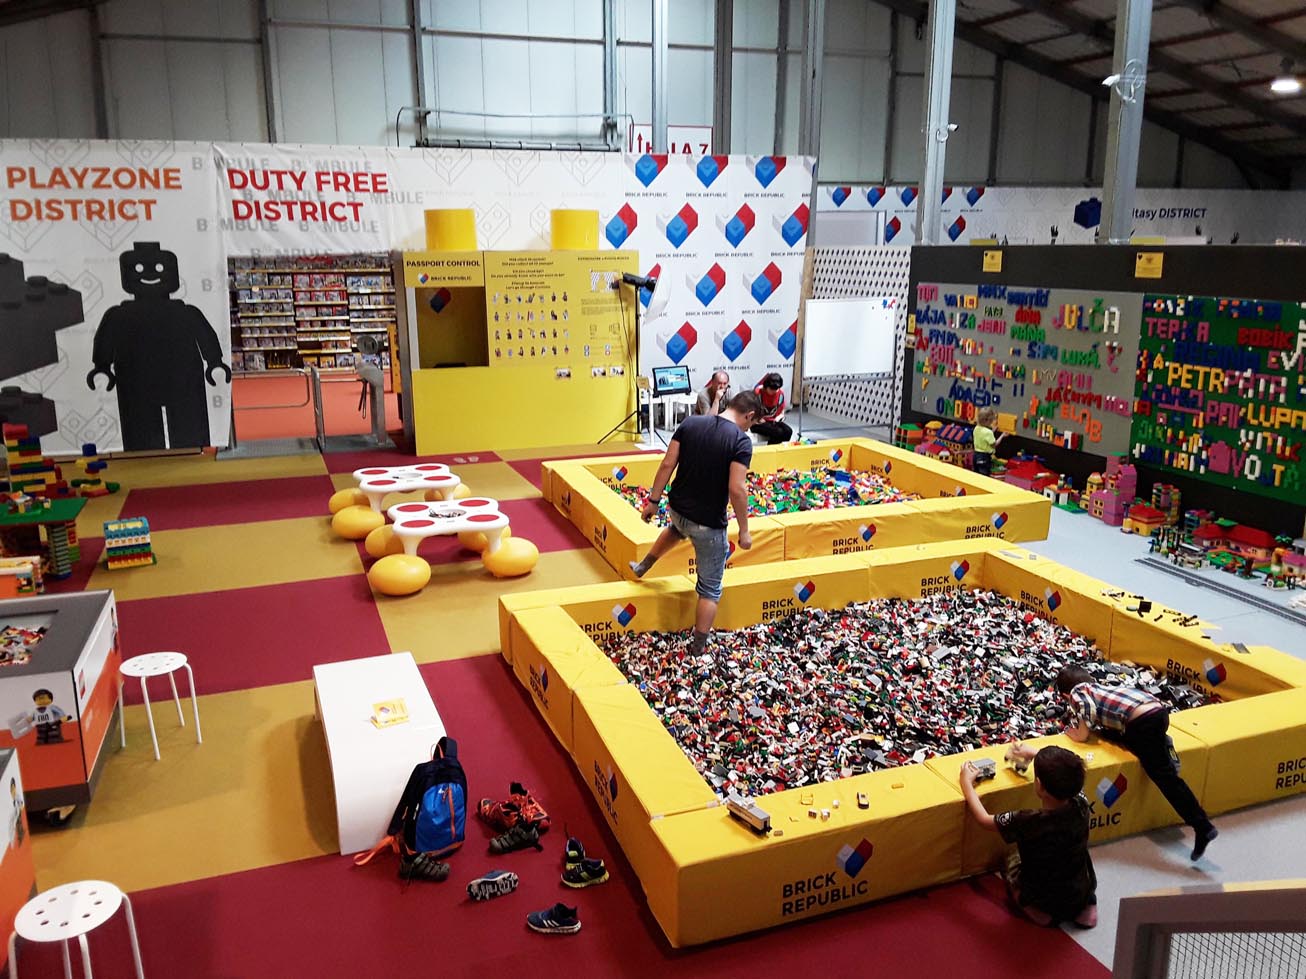 Play zone for adults and kids